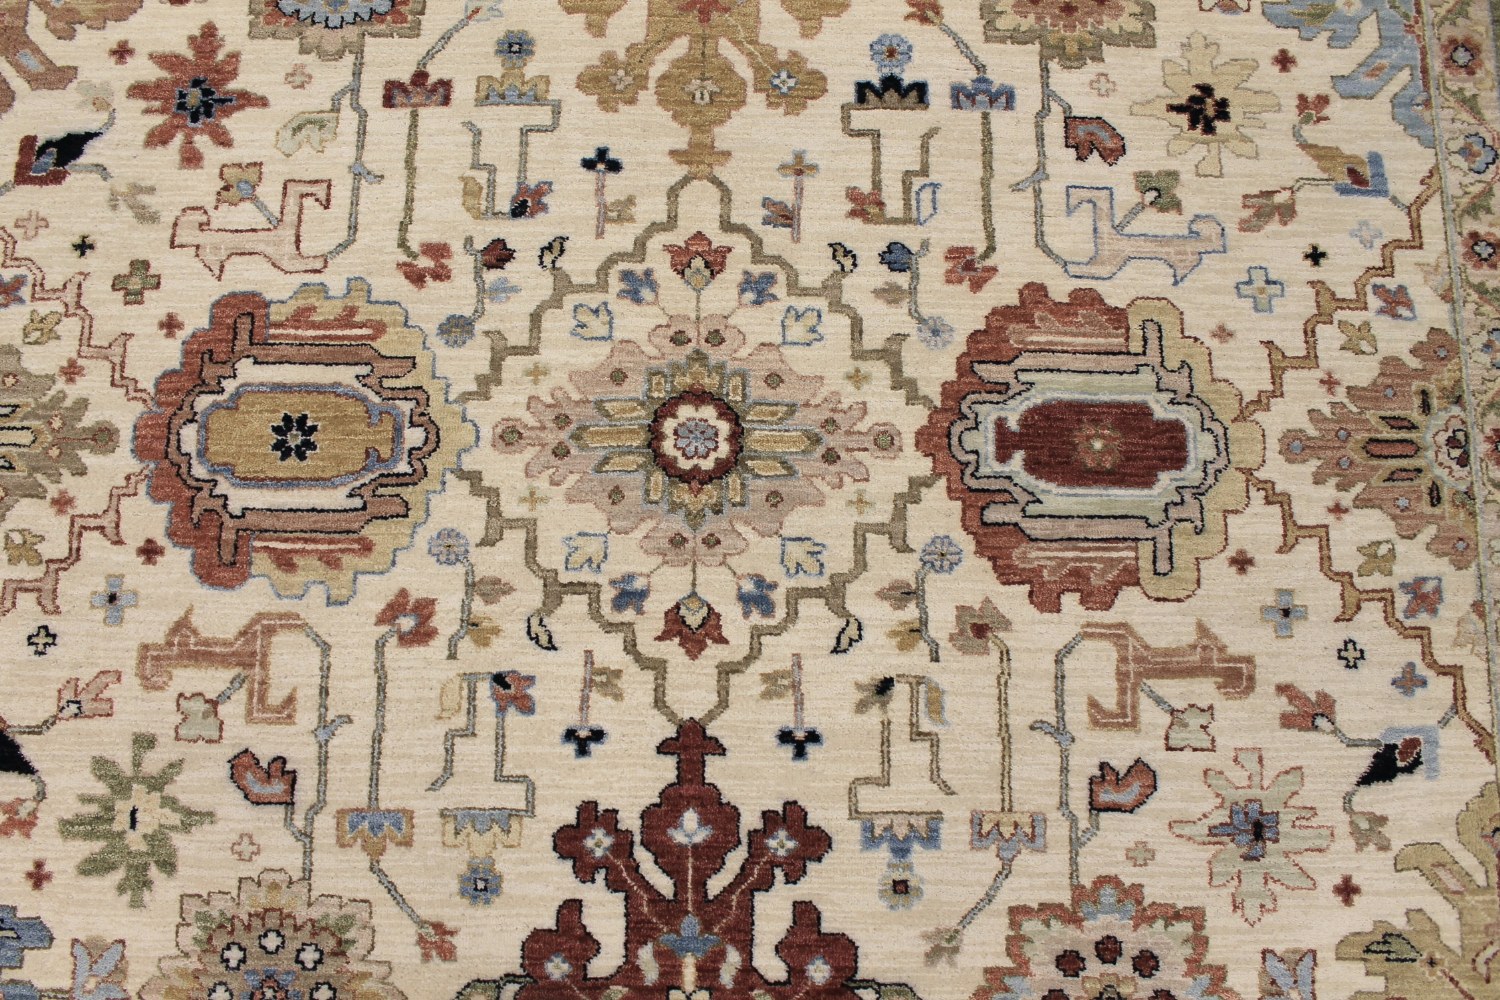 8x10 Traditional Hand Knotted Wool Area Rug - MR028695